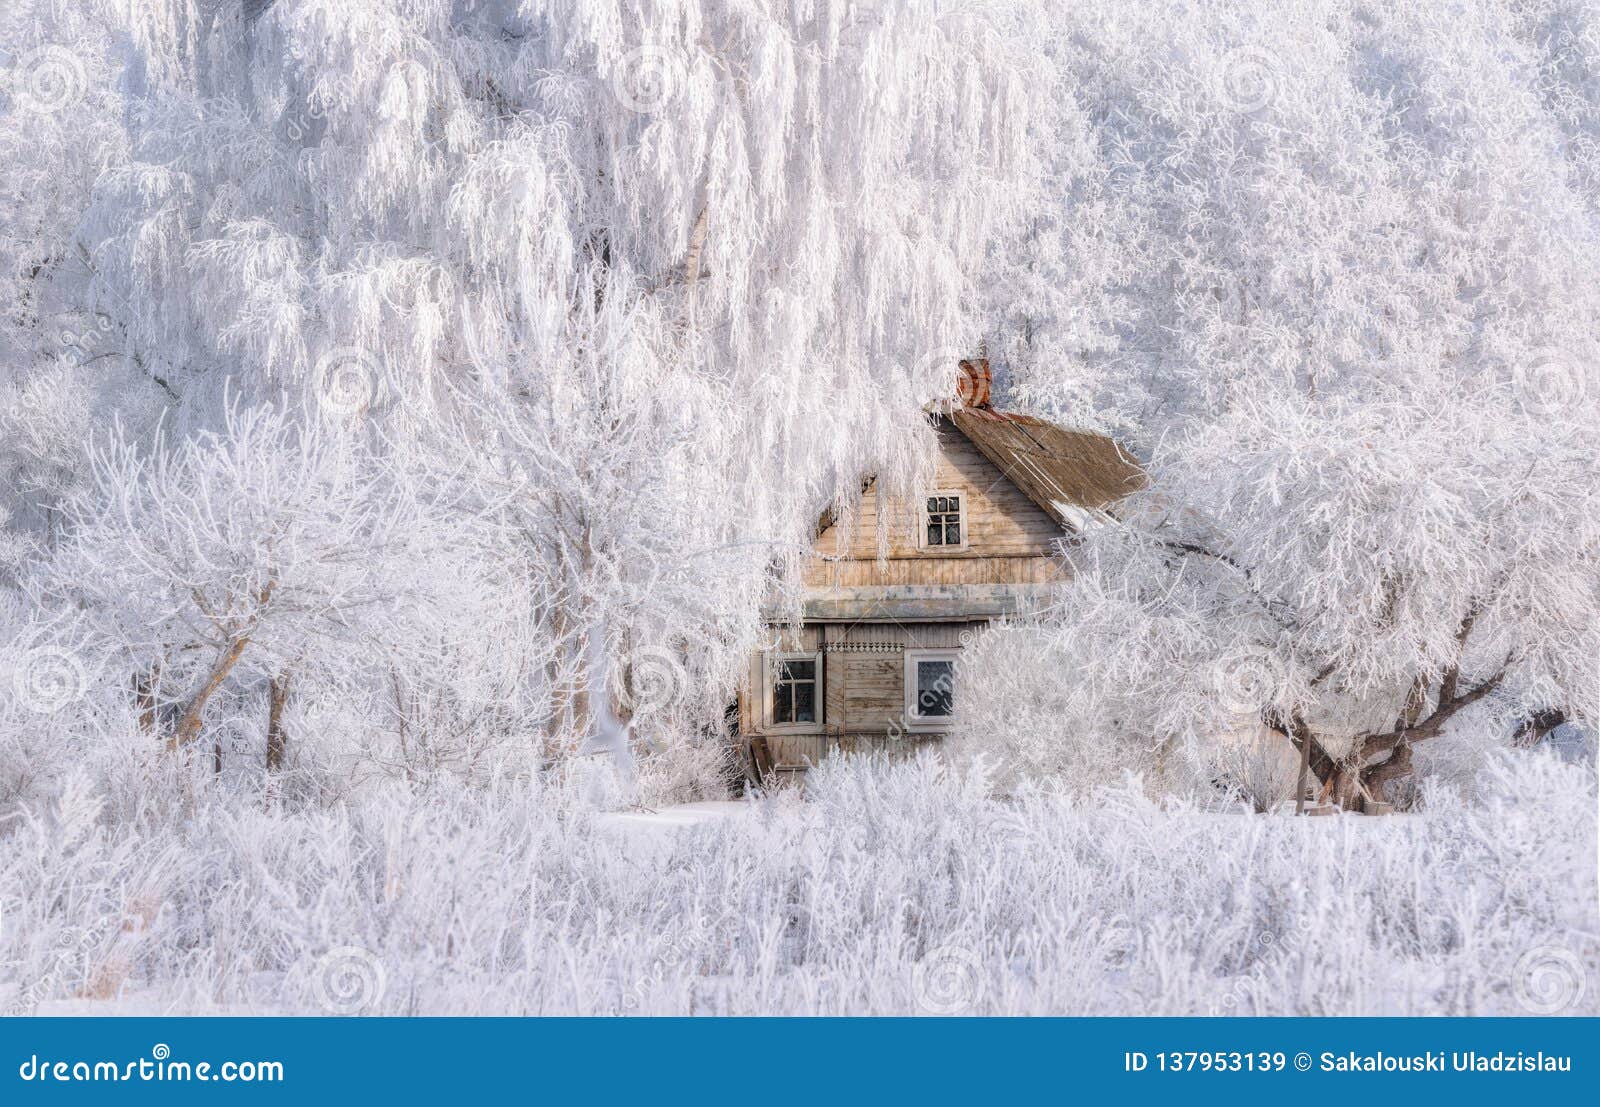 winter christmas landscape in pink tones with old fairy tale house, surrounded by trees in hoarfrost. rural landscape with scenic